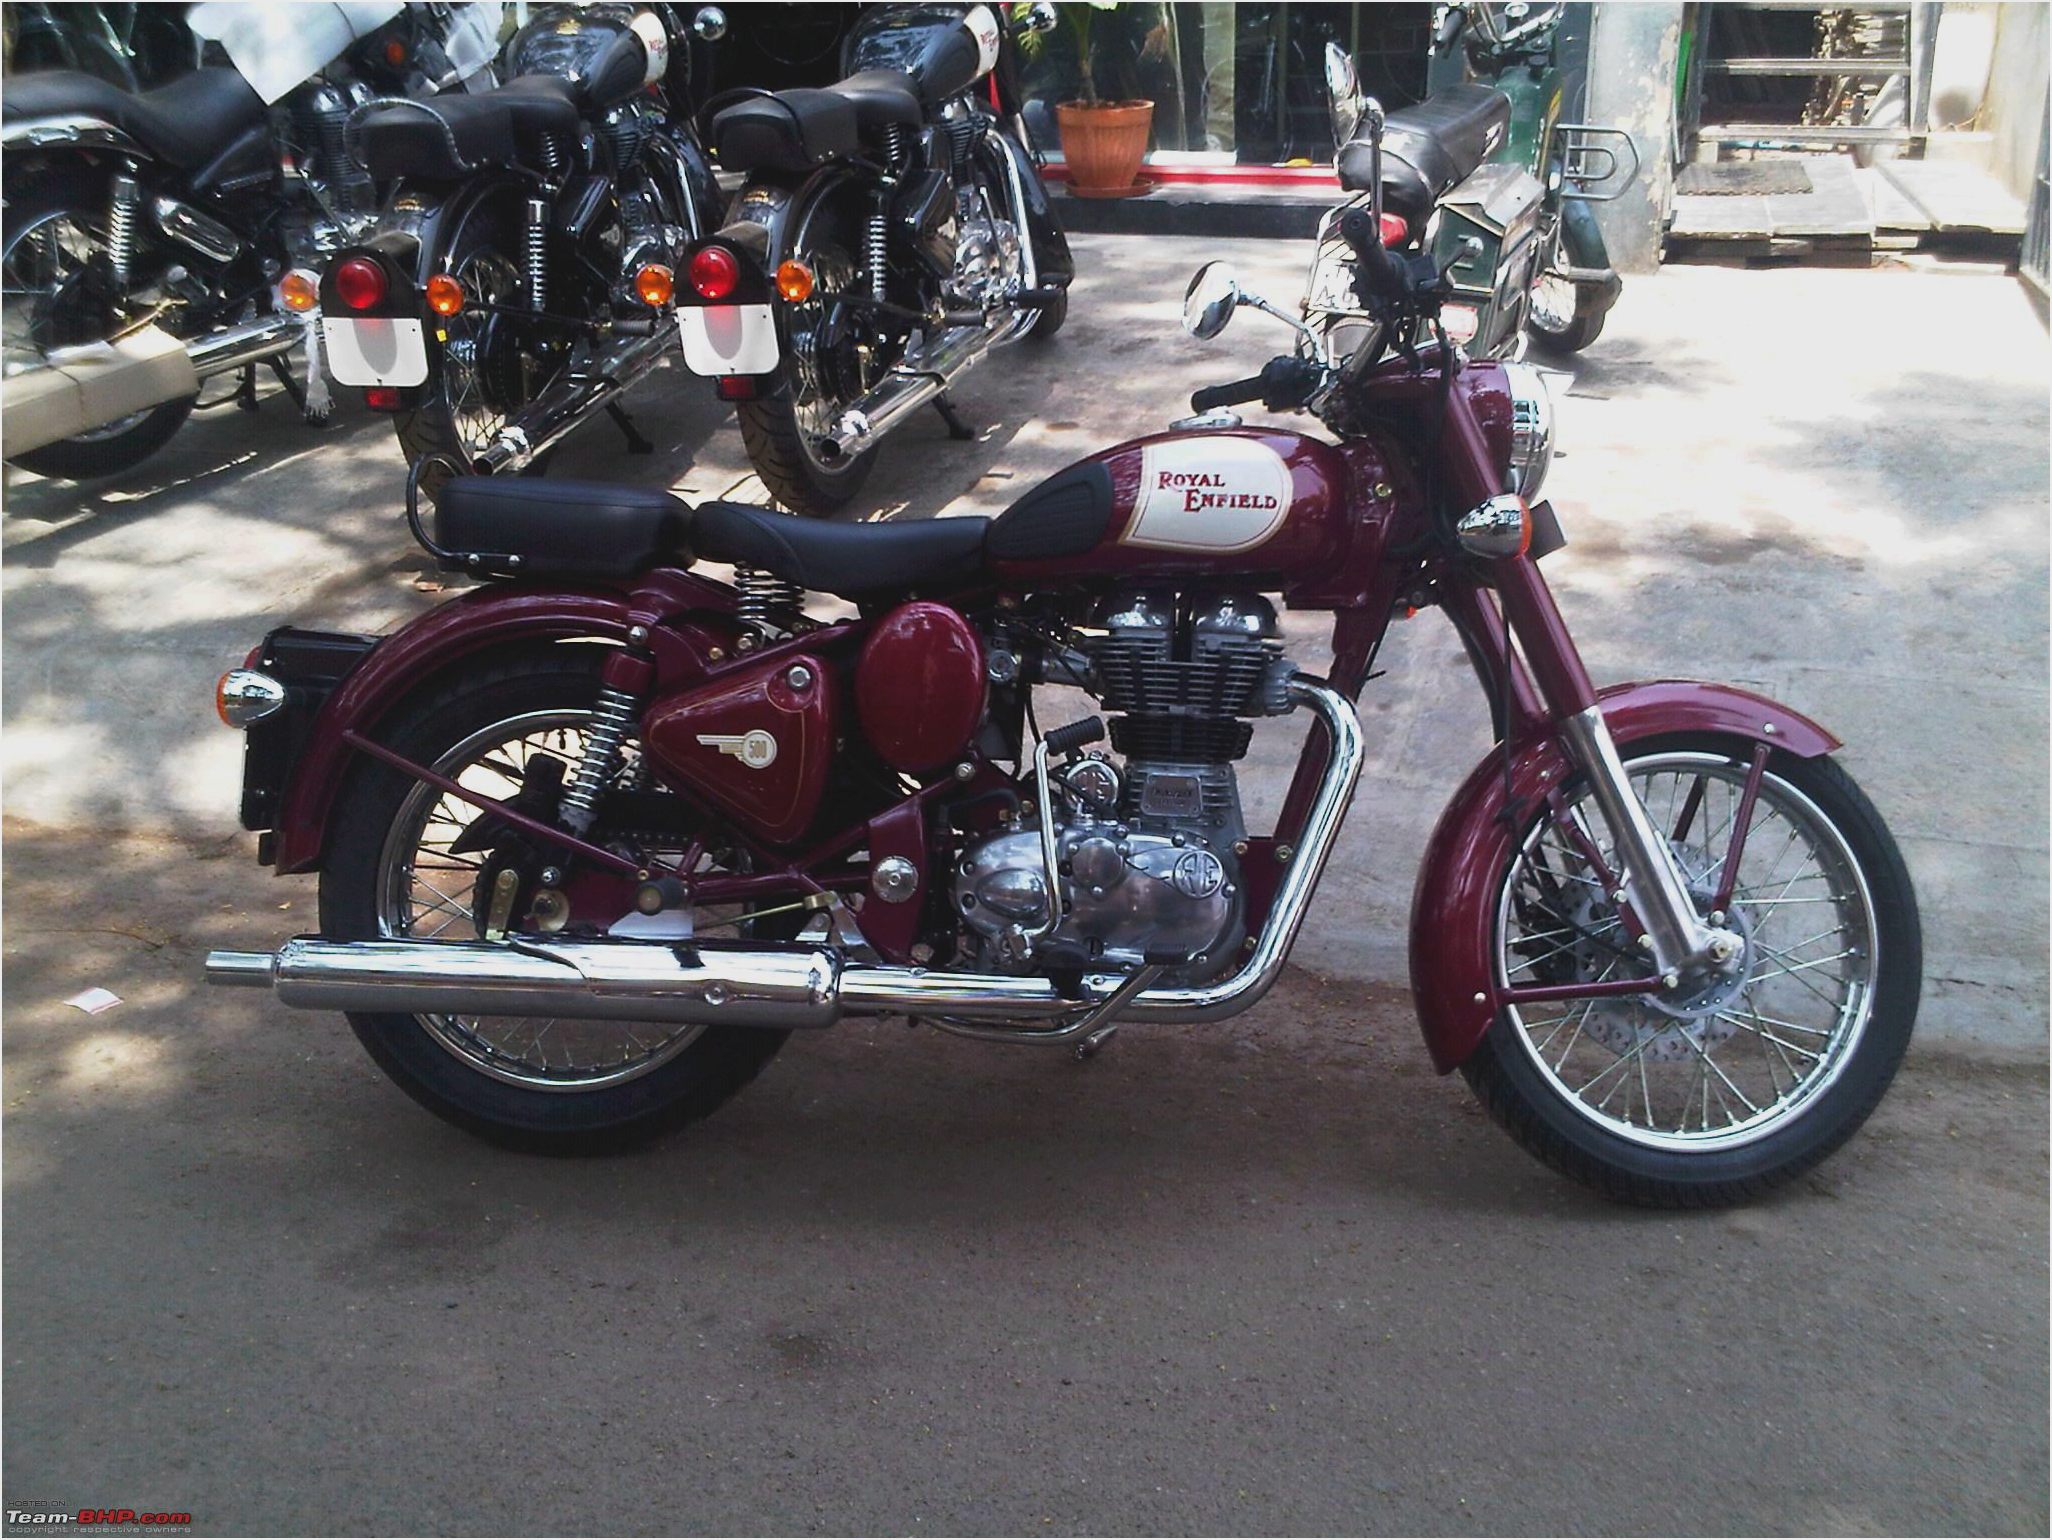 Royal Enfield Bullet 350 Classic 2007 Images - Royal Enfield Classic 500 Price In Lucknow - HD Wallpaper 